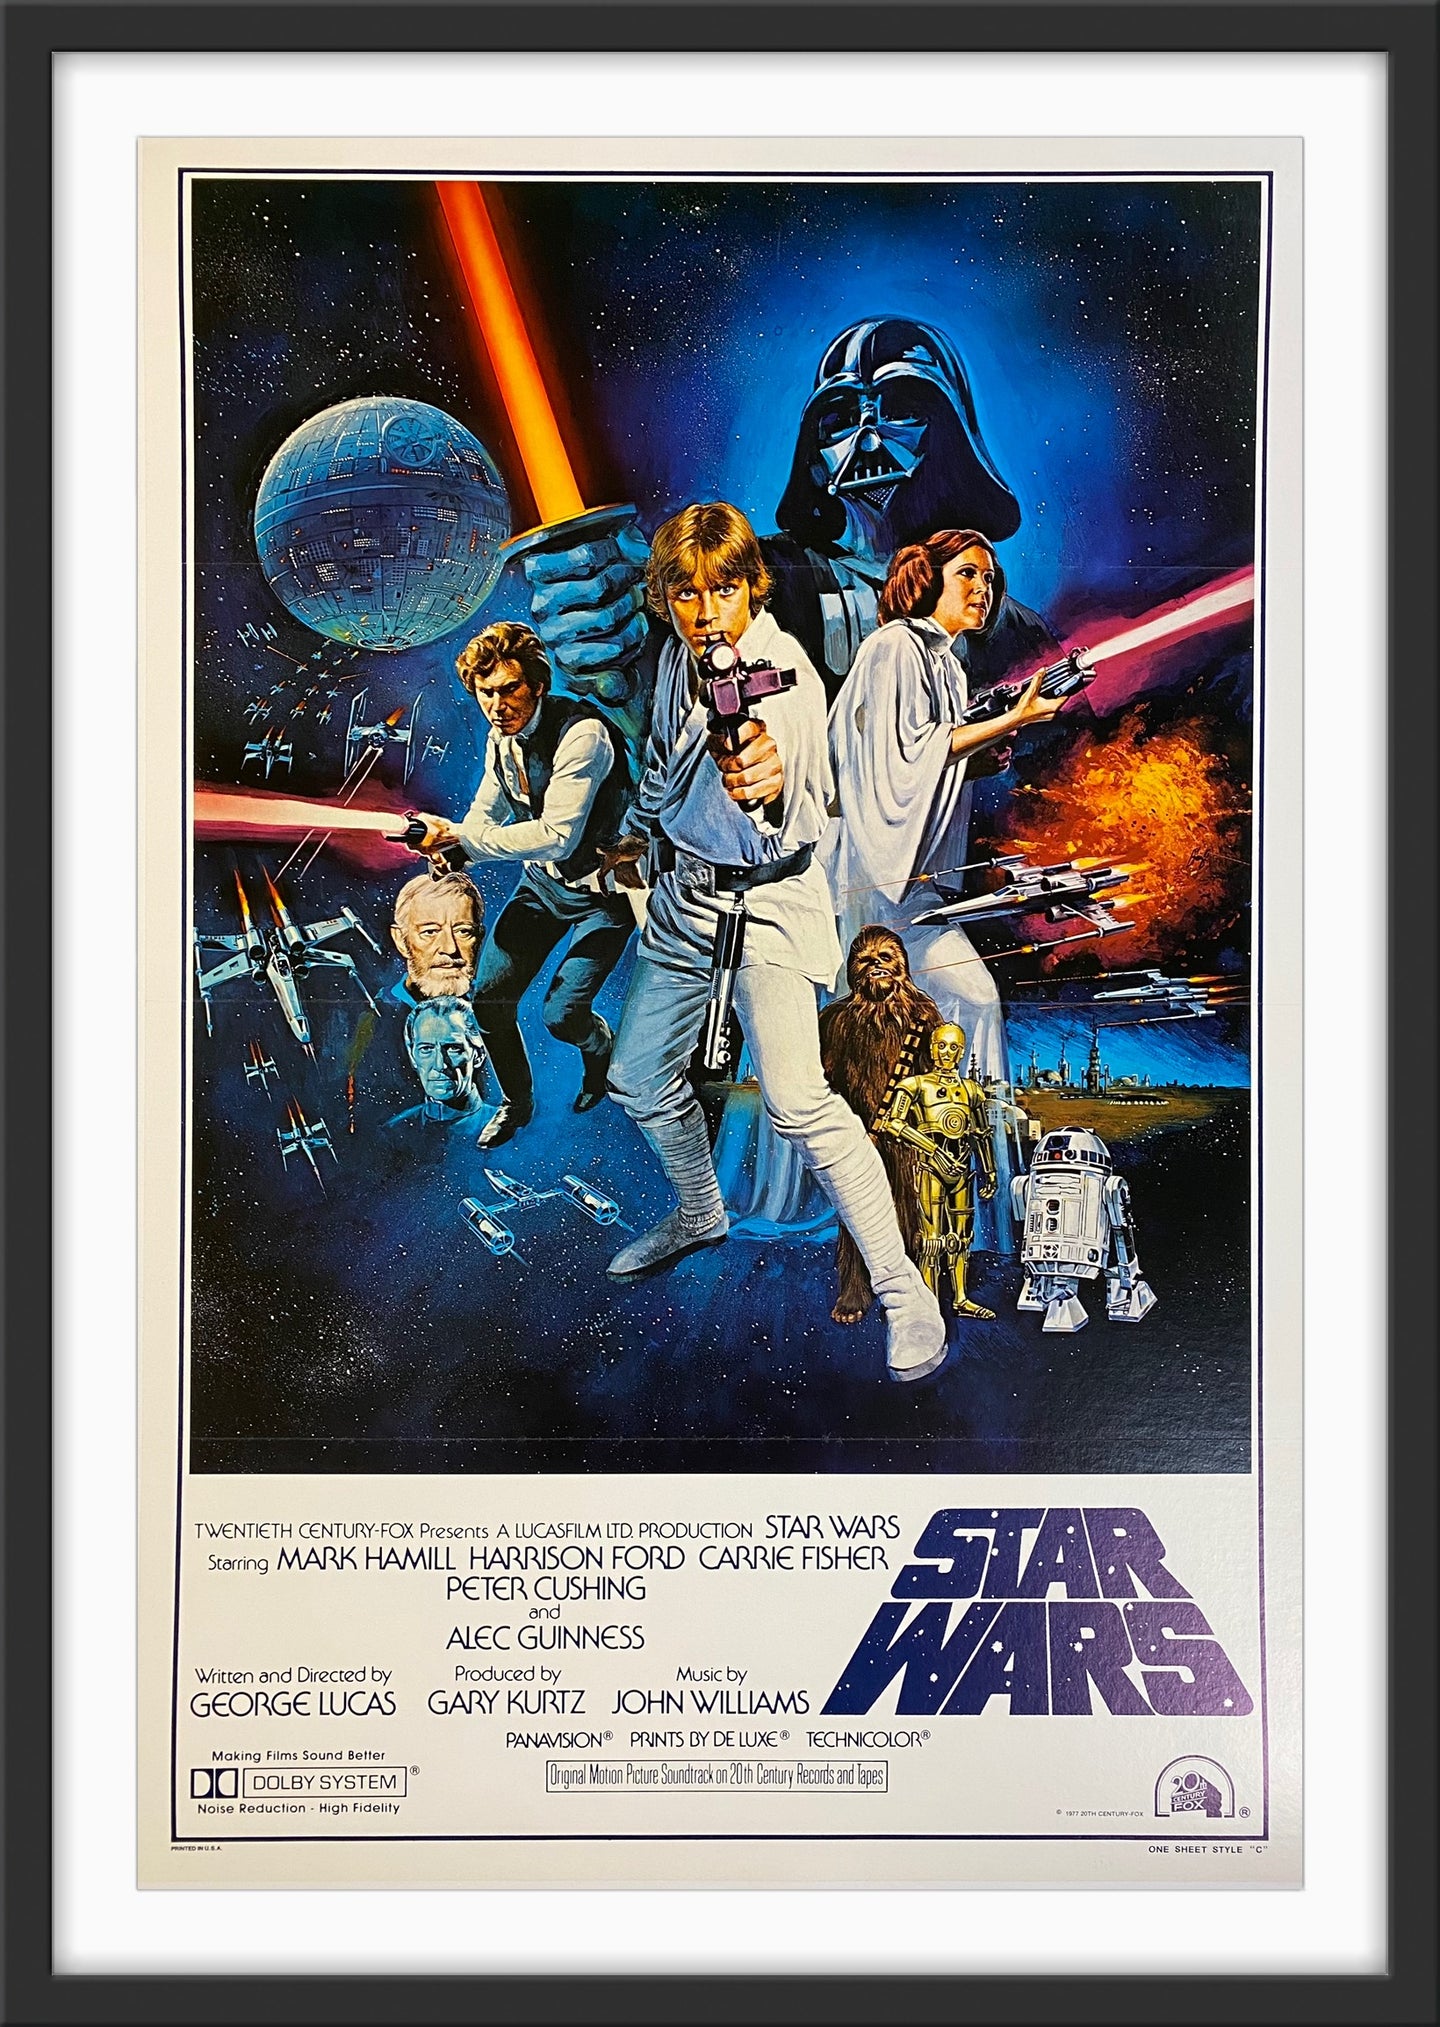 An original Style C movie poster for the film Star Wars / Episode 4 / IV / A New Hope / 1977